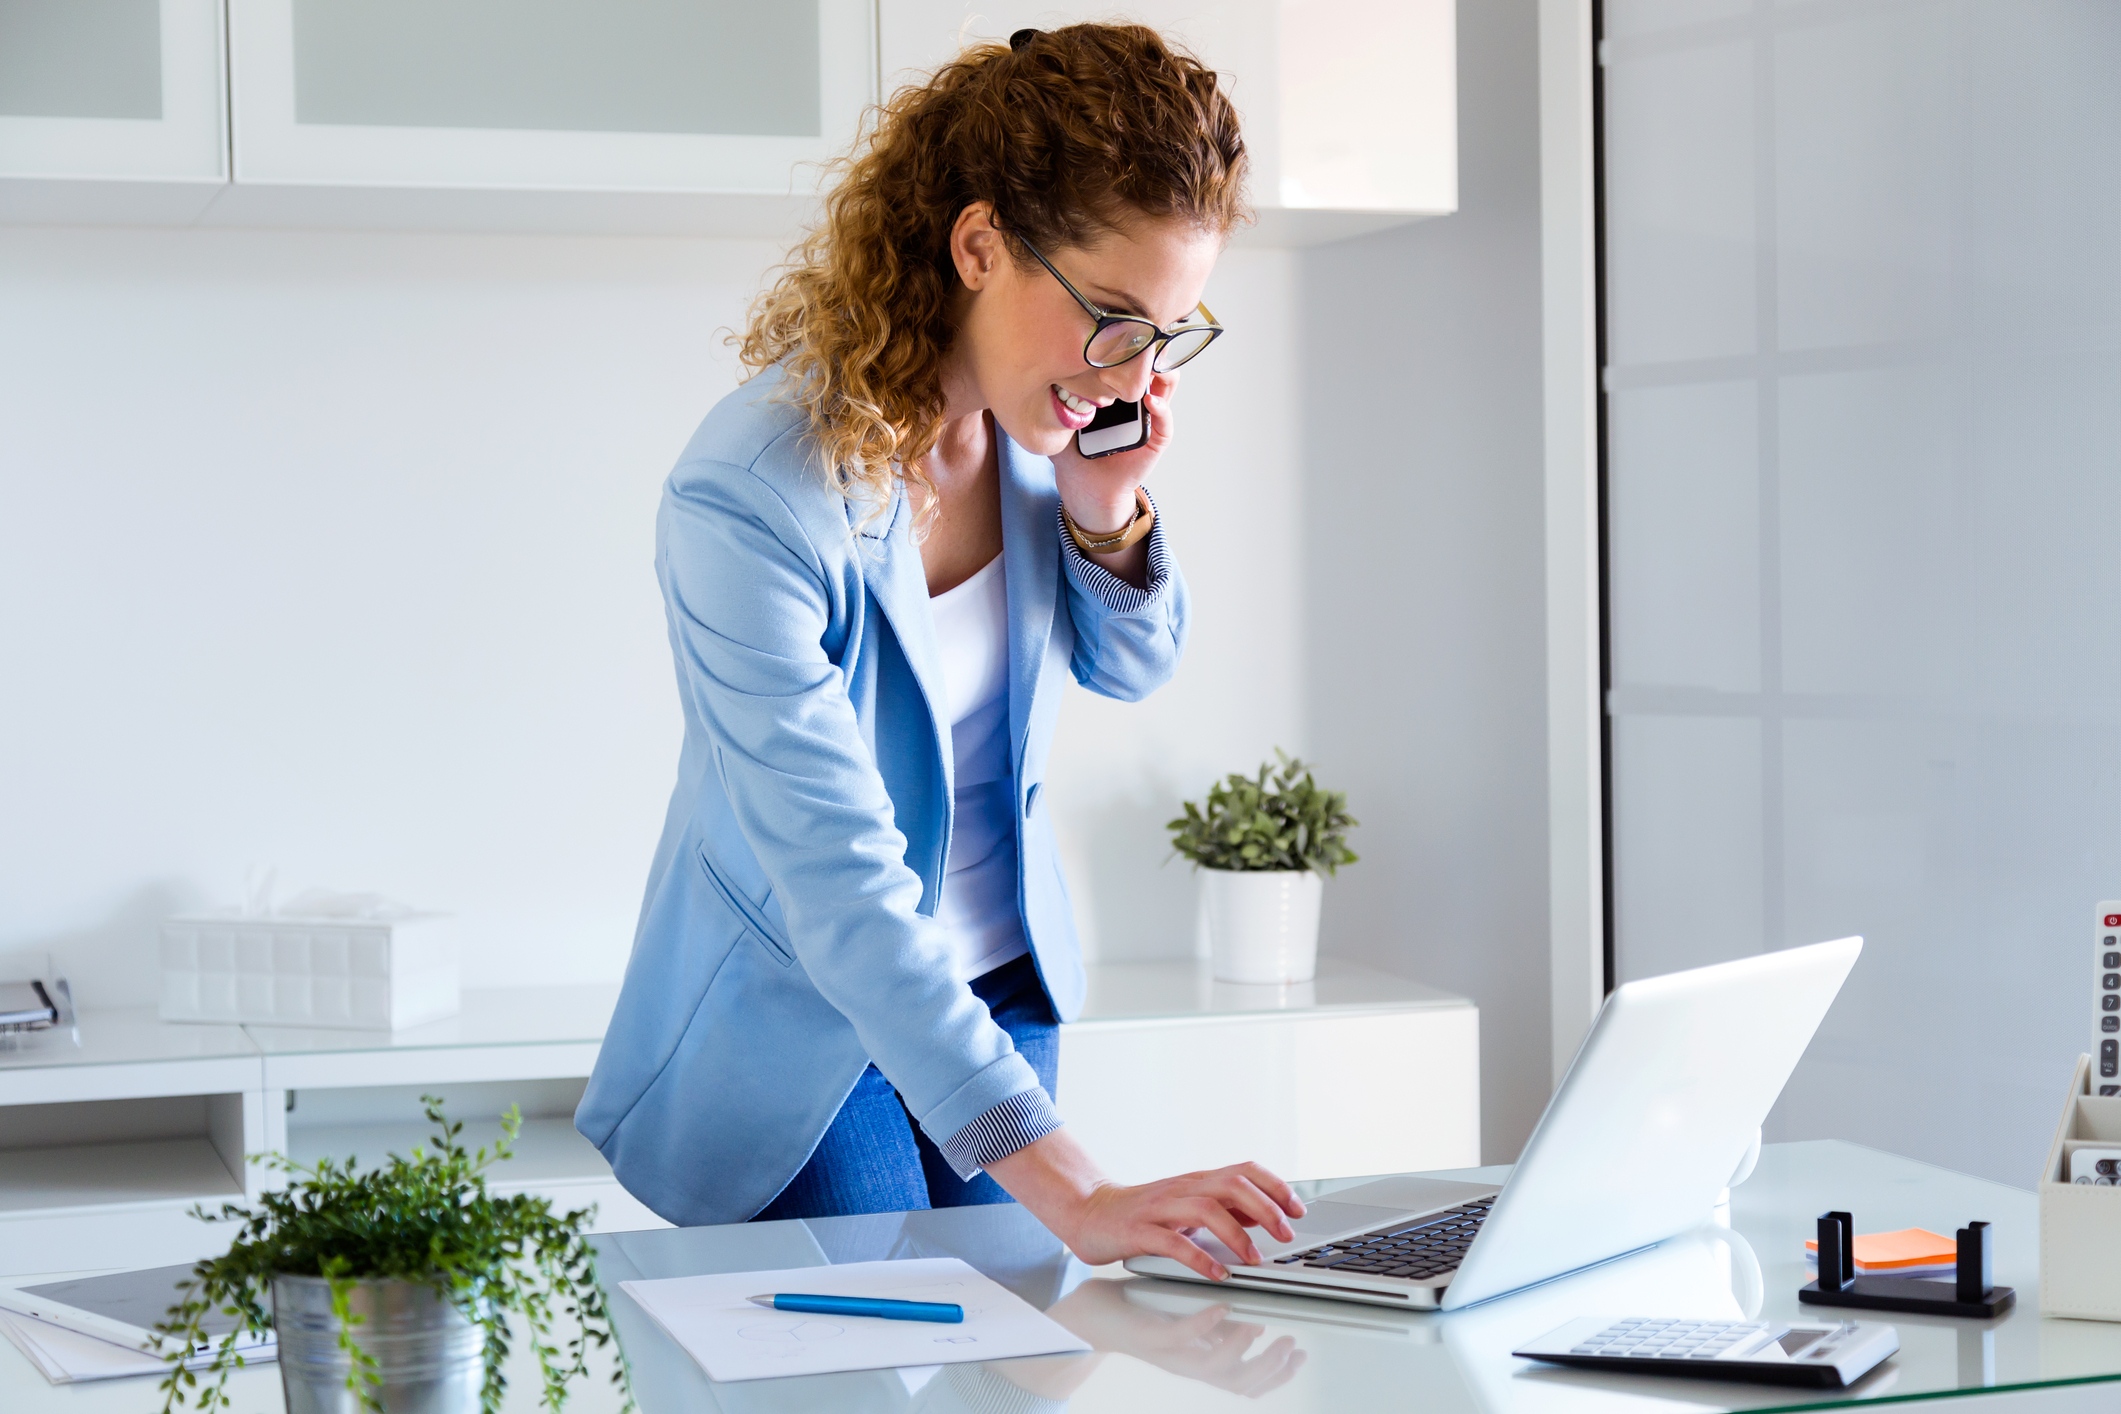 How to Use VoIP to Streamline Your Business Communications